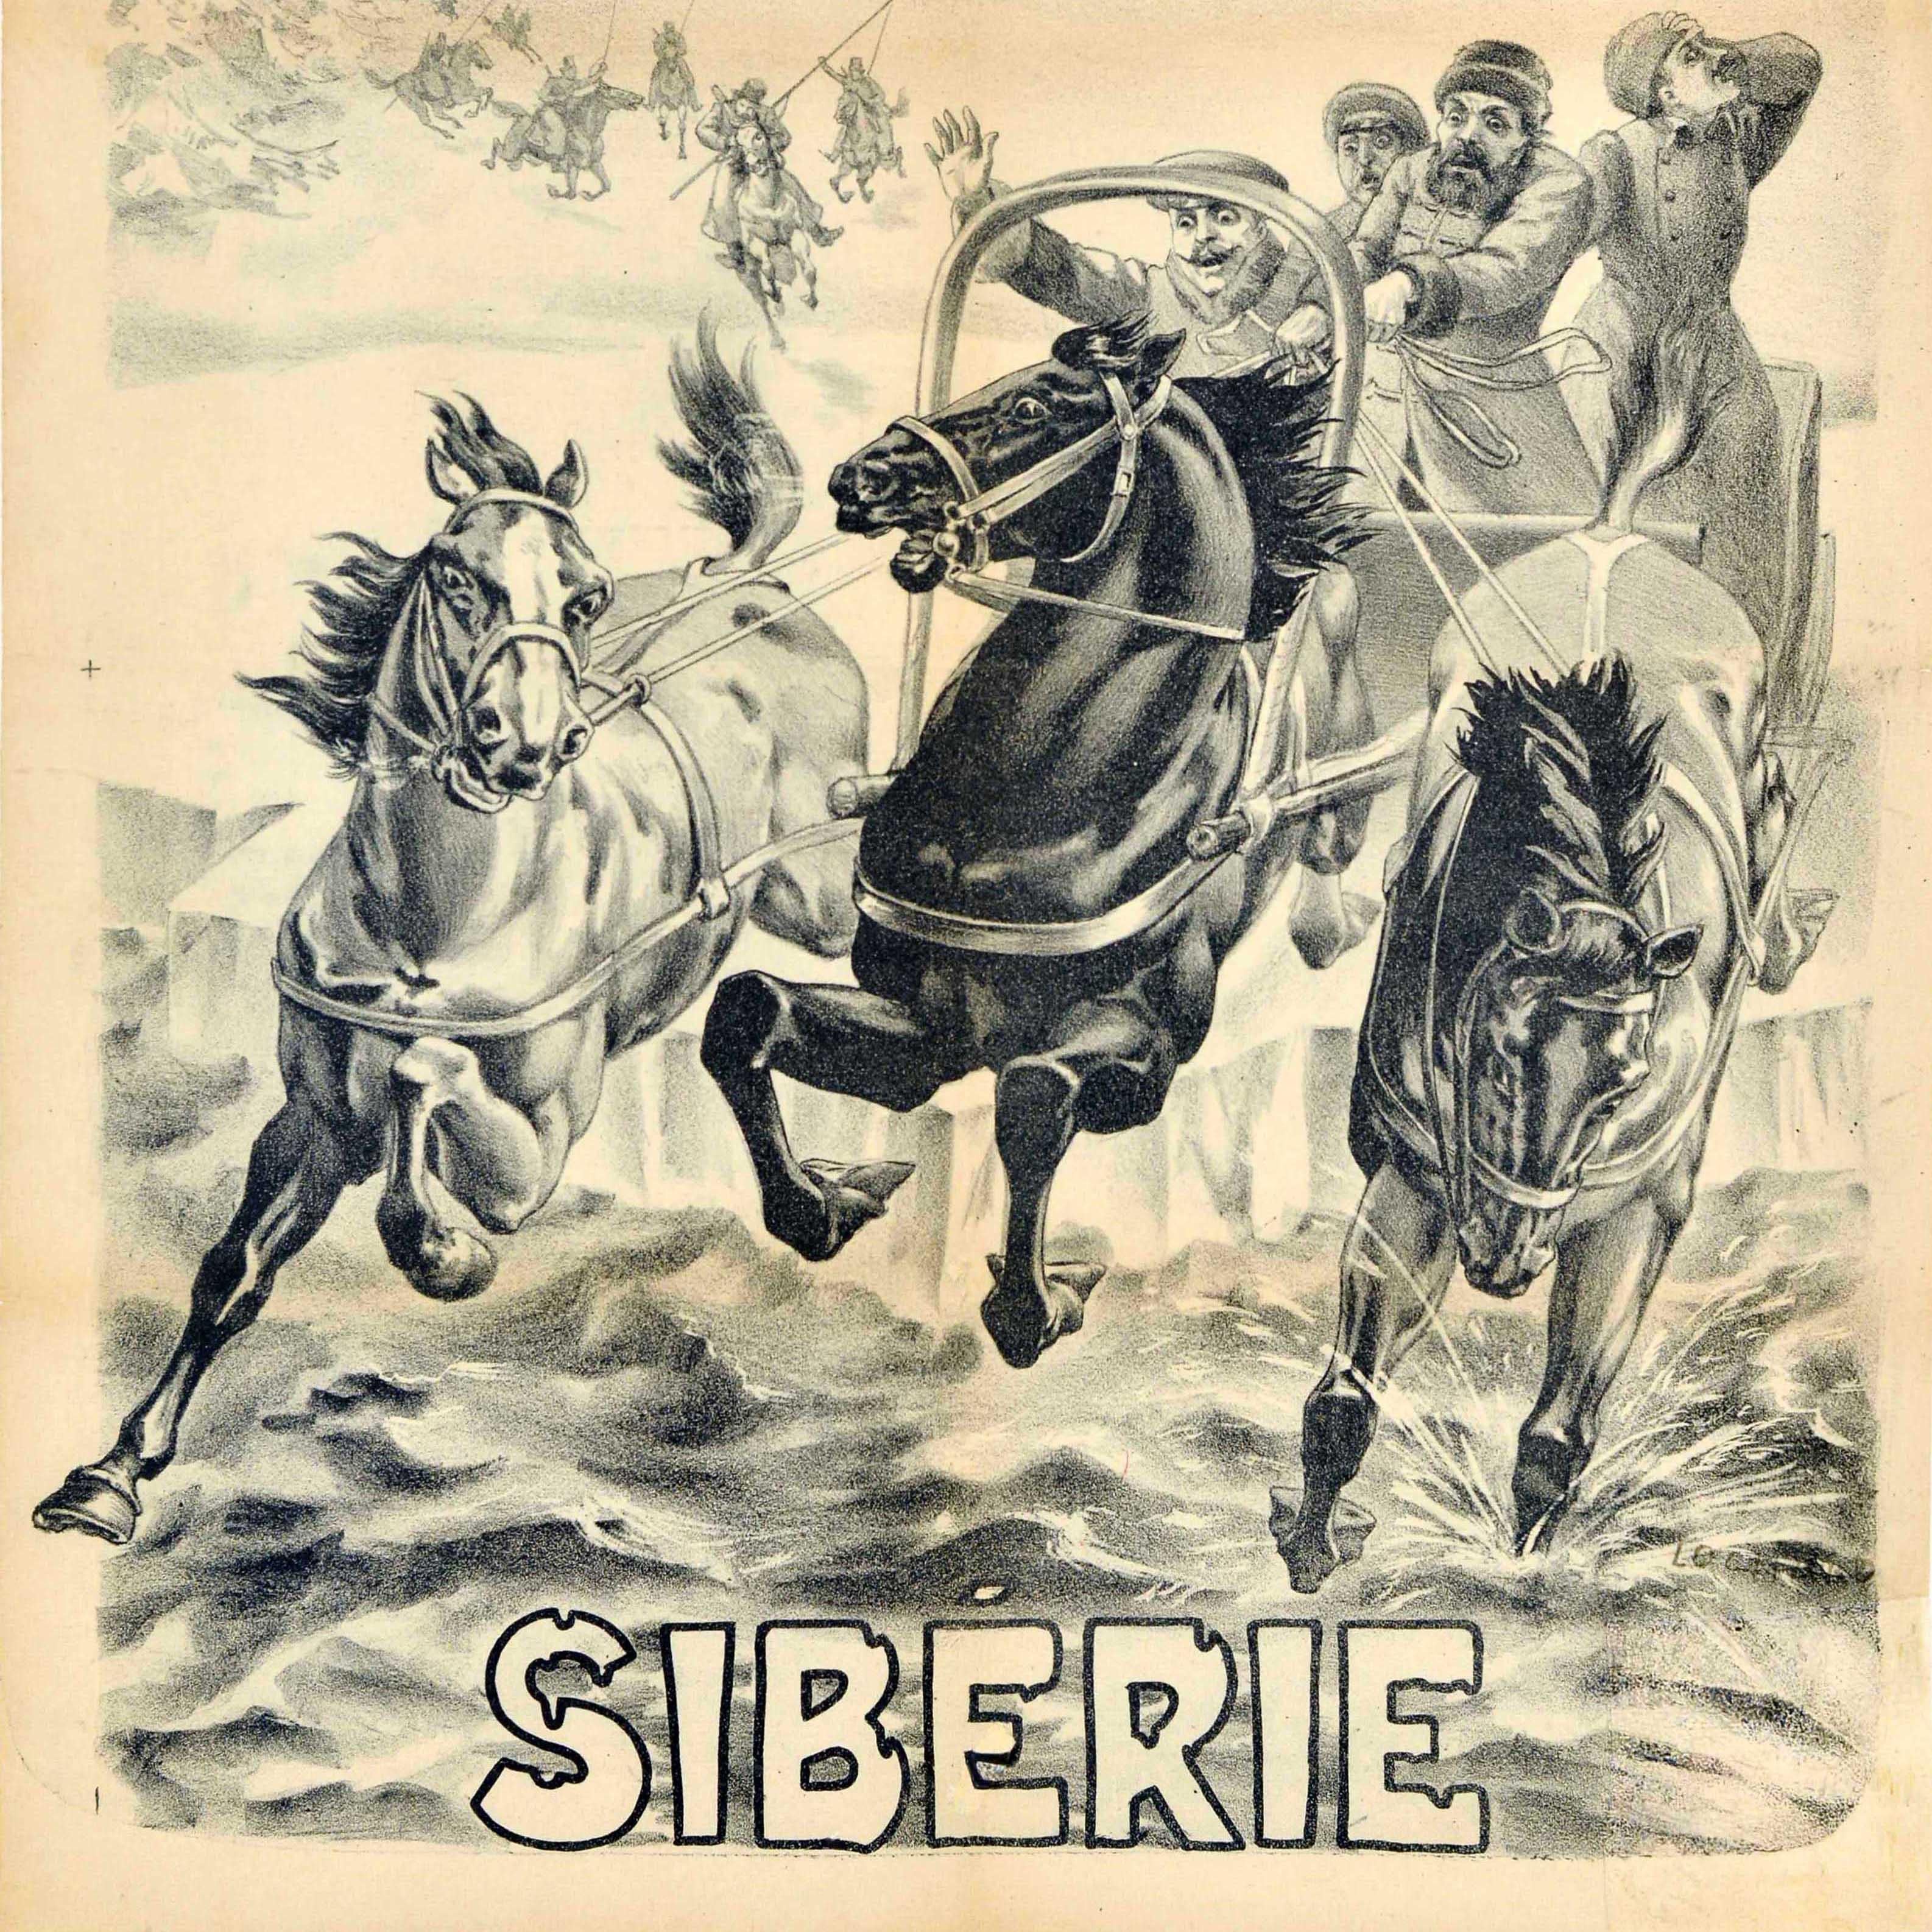 Original antique advertising poster for a circus pantomime show - Nouveau Cirque Siberie / Siberia - directed by the Russian circus director, acrobat and animal trainer Mathias Beketov (1867-1928) held in Paris at the Nouveau Cirque 251 Rue St